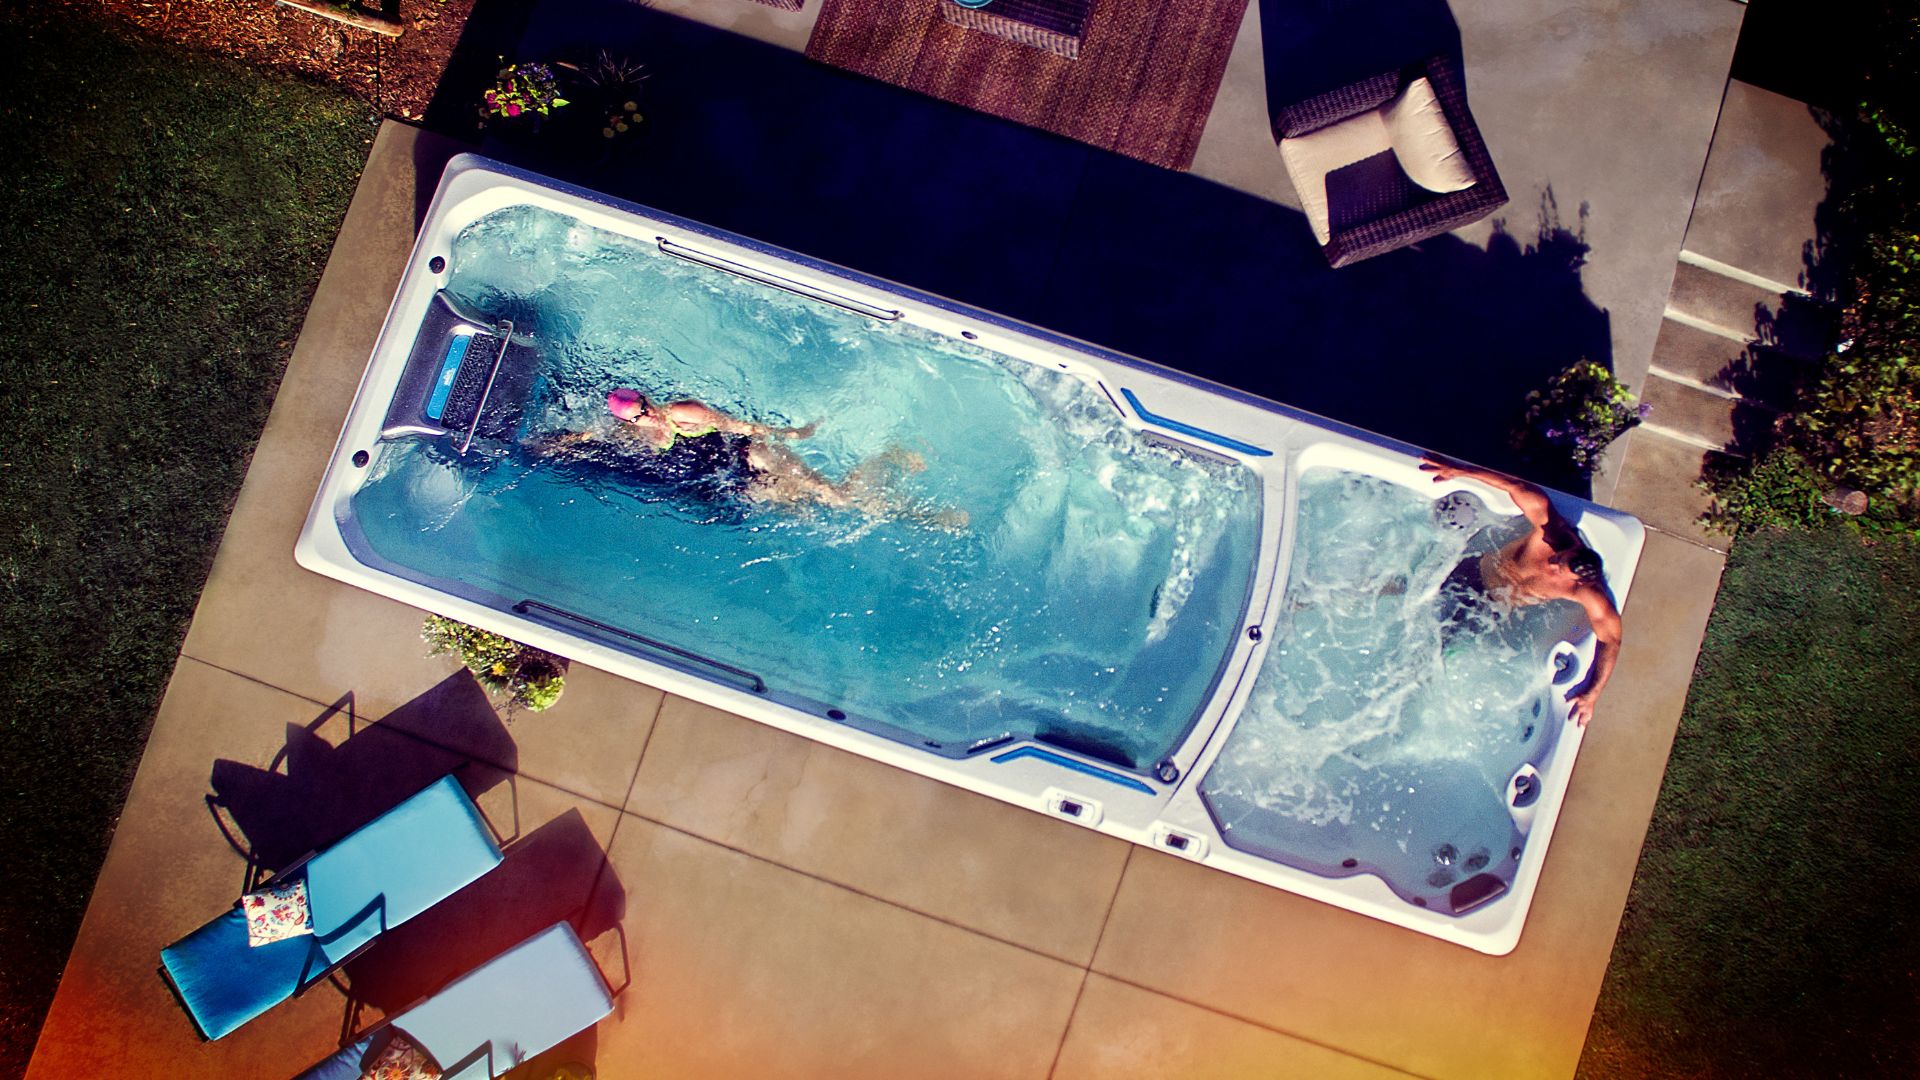 How to Visualize an Endless Pools Swim Spa in Your Backyard